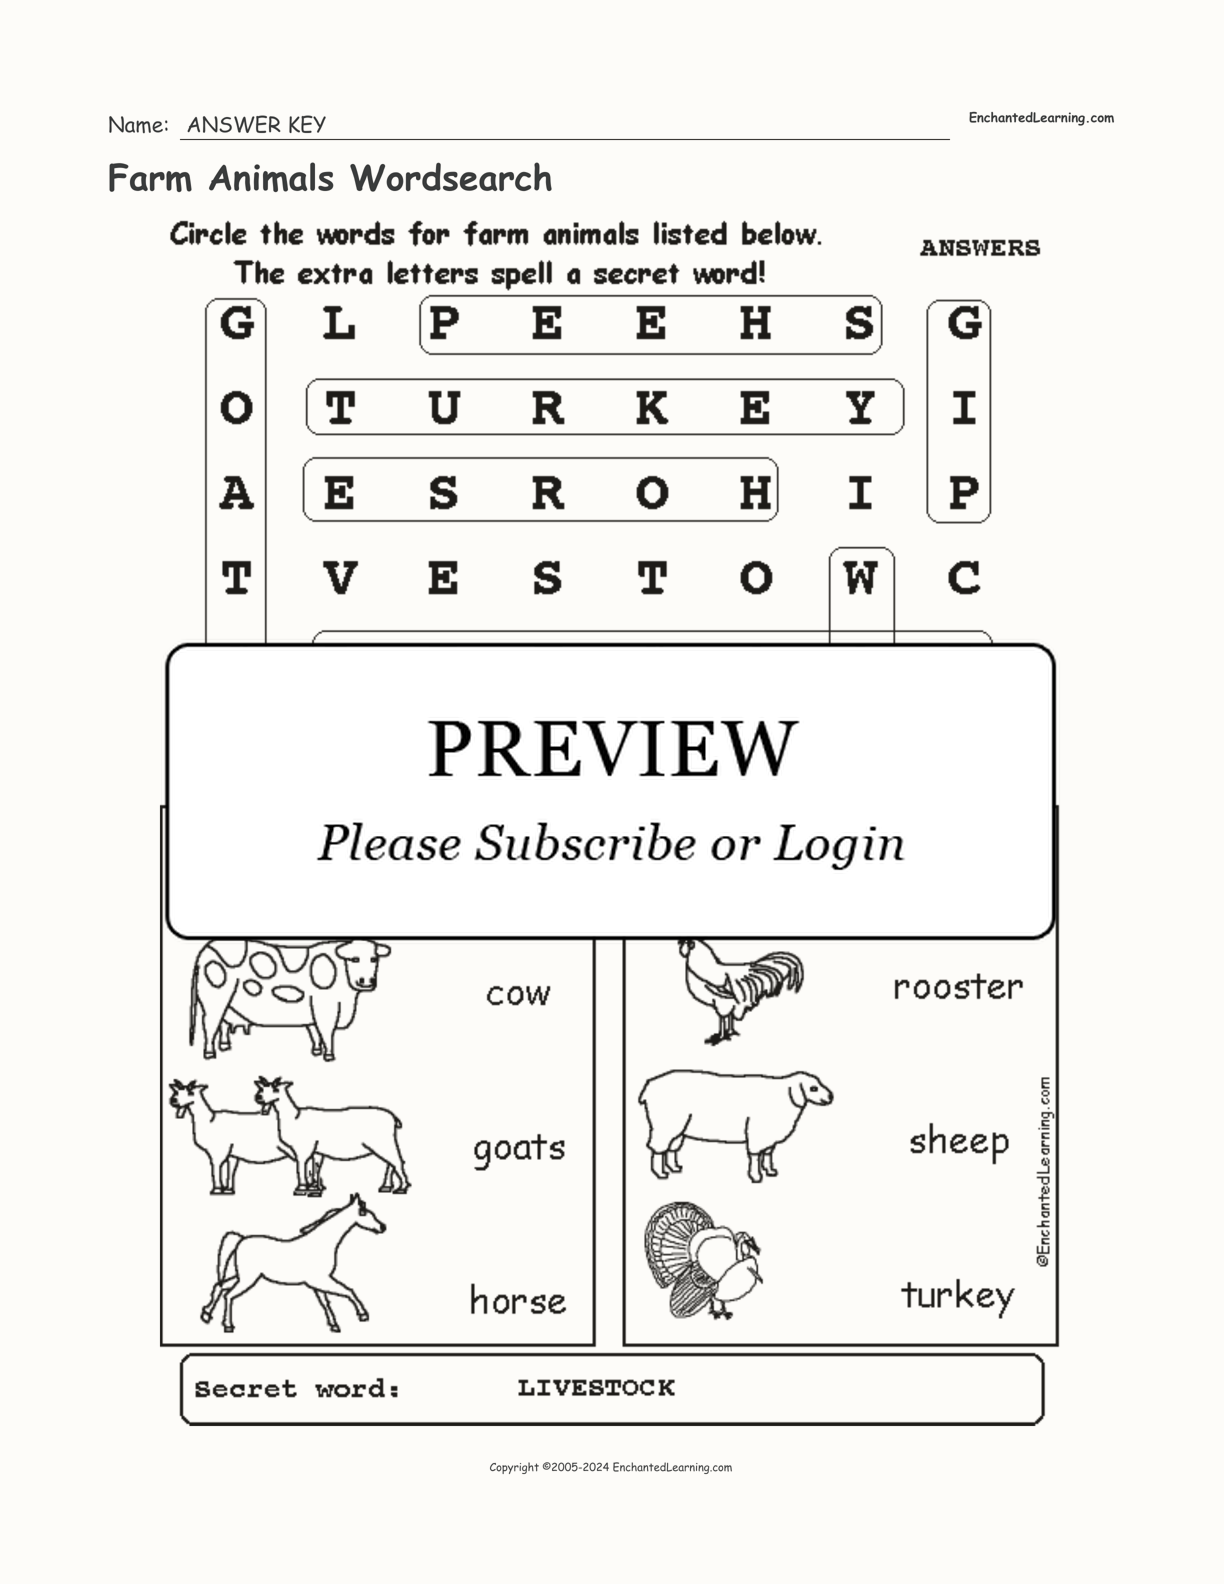 Farm Animals Wordsearch interactive worksheet page 2